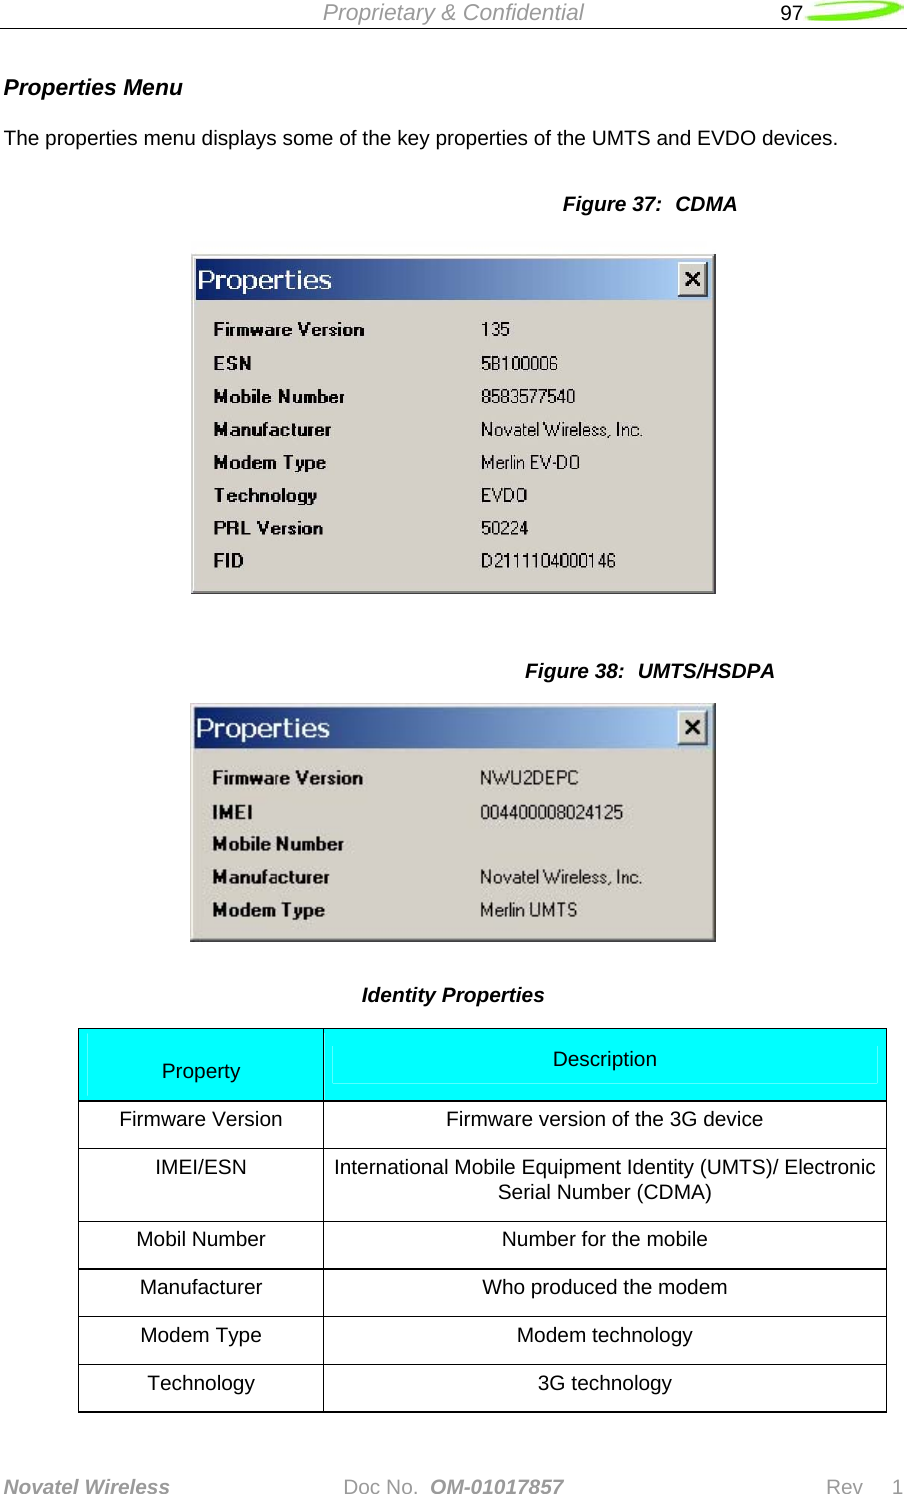  Proprietary &amp; Confidential   97   Novatel Wireless   Doc No.  OM-01017857                              Rev     1  Properties Menu  The properties menu displays some of the key properties of the UMTS and EVDO devices.  Figure 37:  CDMA   Figure 38:  UMTS/HSDPA  Identity Properties  Property  Description Firmware Version  Firmware version of the 3G device IMEI/ESN  International Mobile Equipment Identity (UMTS)/ Electronic Serial Number (CDMA) Mobil Number  Number for the mobile Manufacturer  Who produced the modem Modem Type  Modem technology Technology 3G technology 